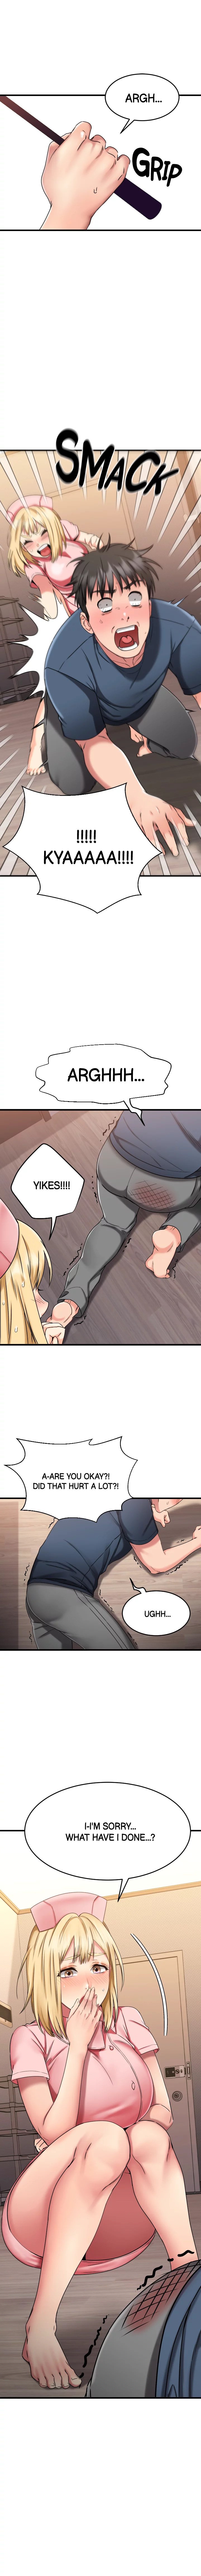 my-female-friend-who-crossed-the-line-chap-30-14